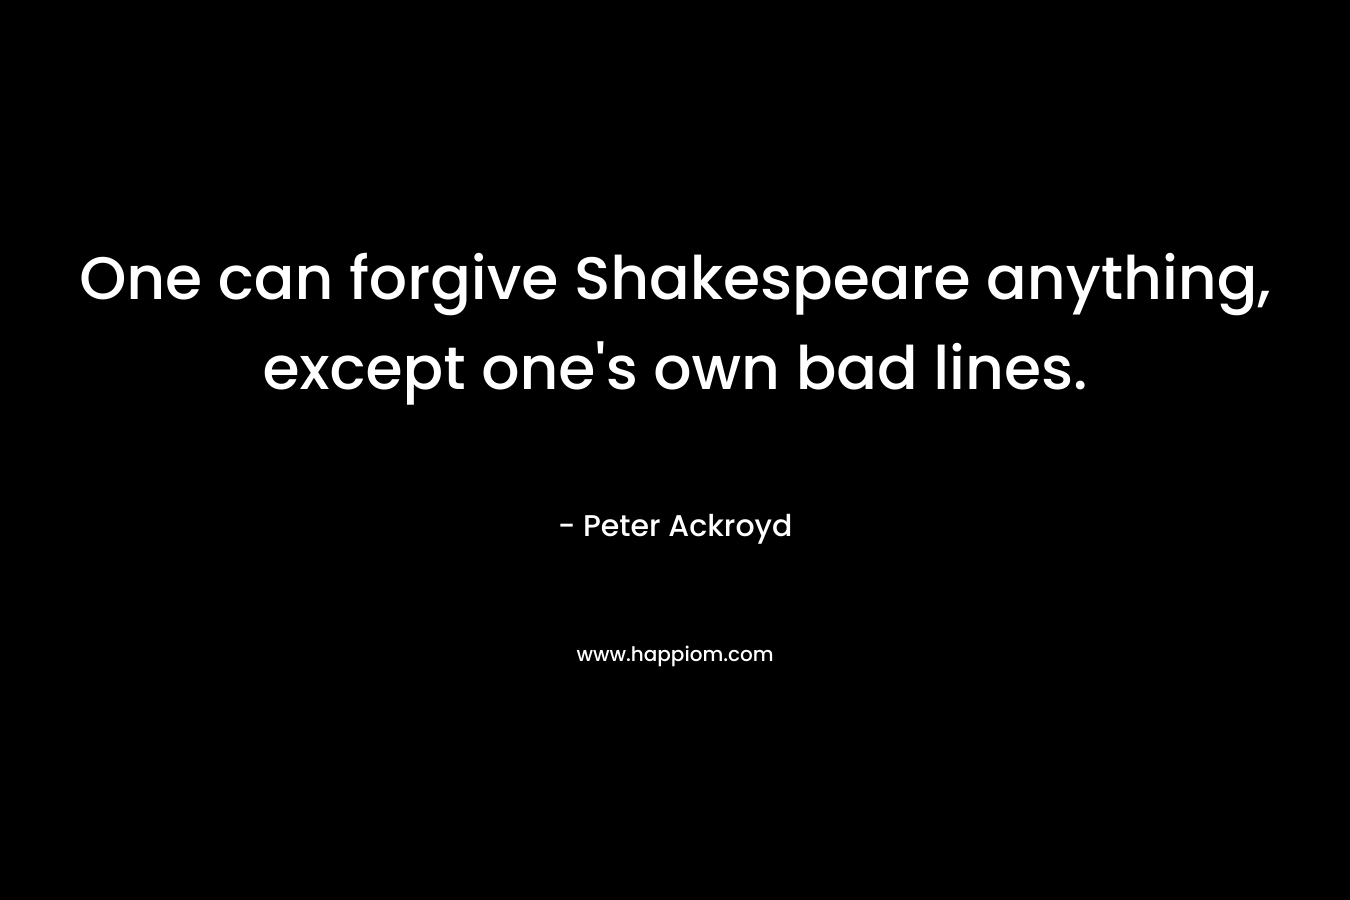 One can forgive Shakespeare anything, except one’s own bad lines. – Peter Ackroyd